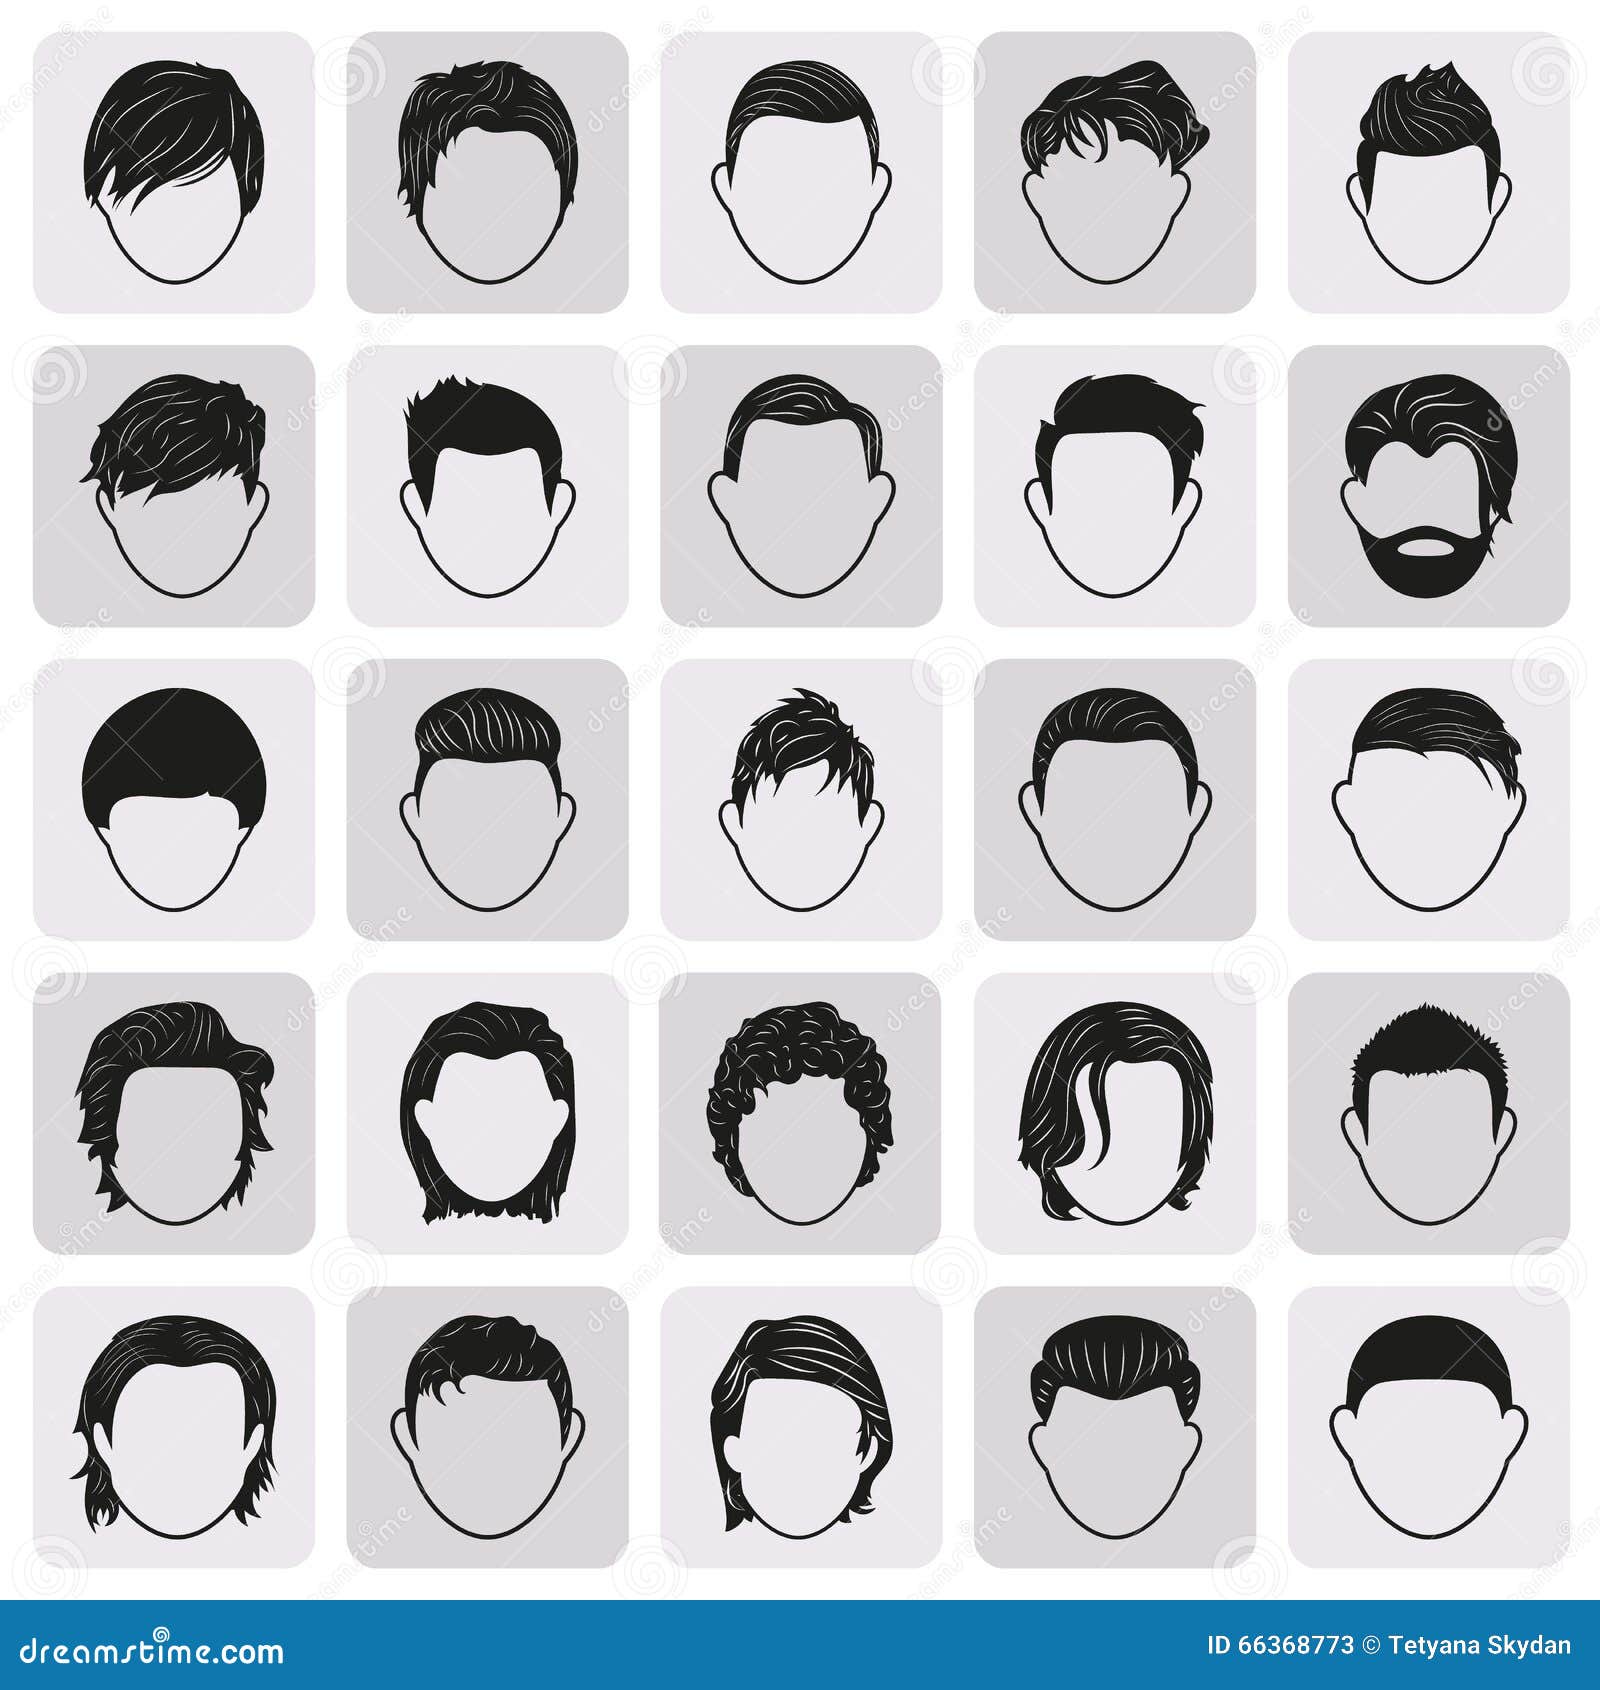 Man Male Hairstyle Black Simple Icons Set Stock Vector - Illustration of  people, handsome: 66368773